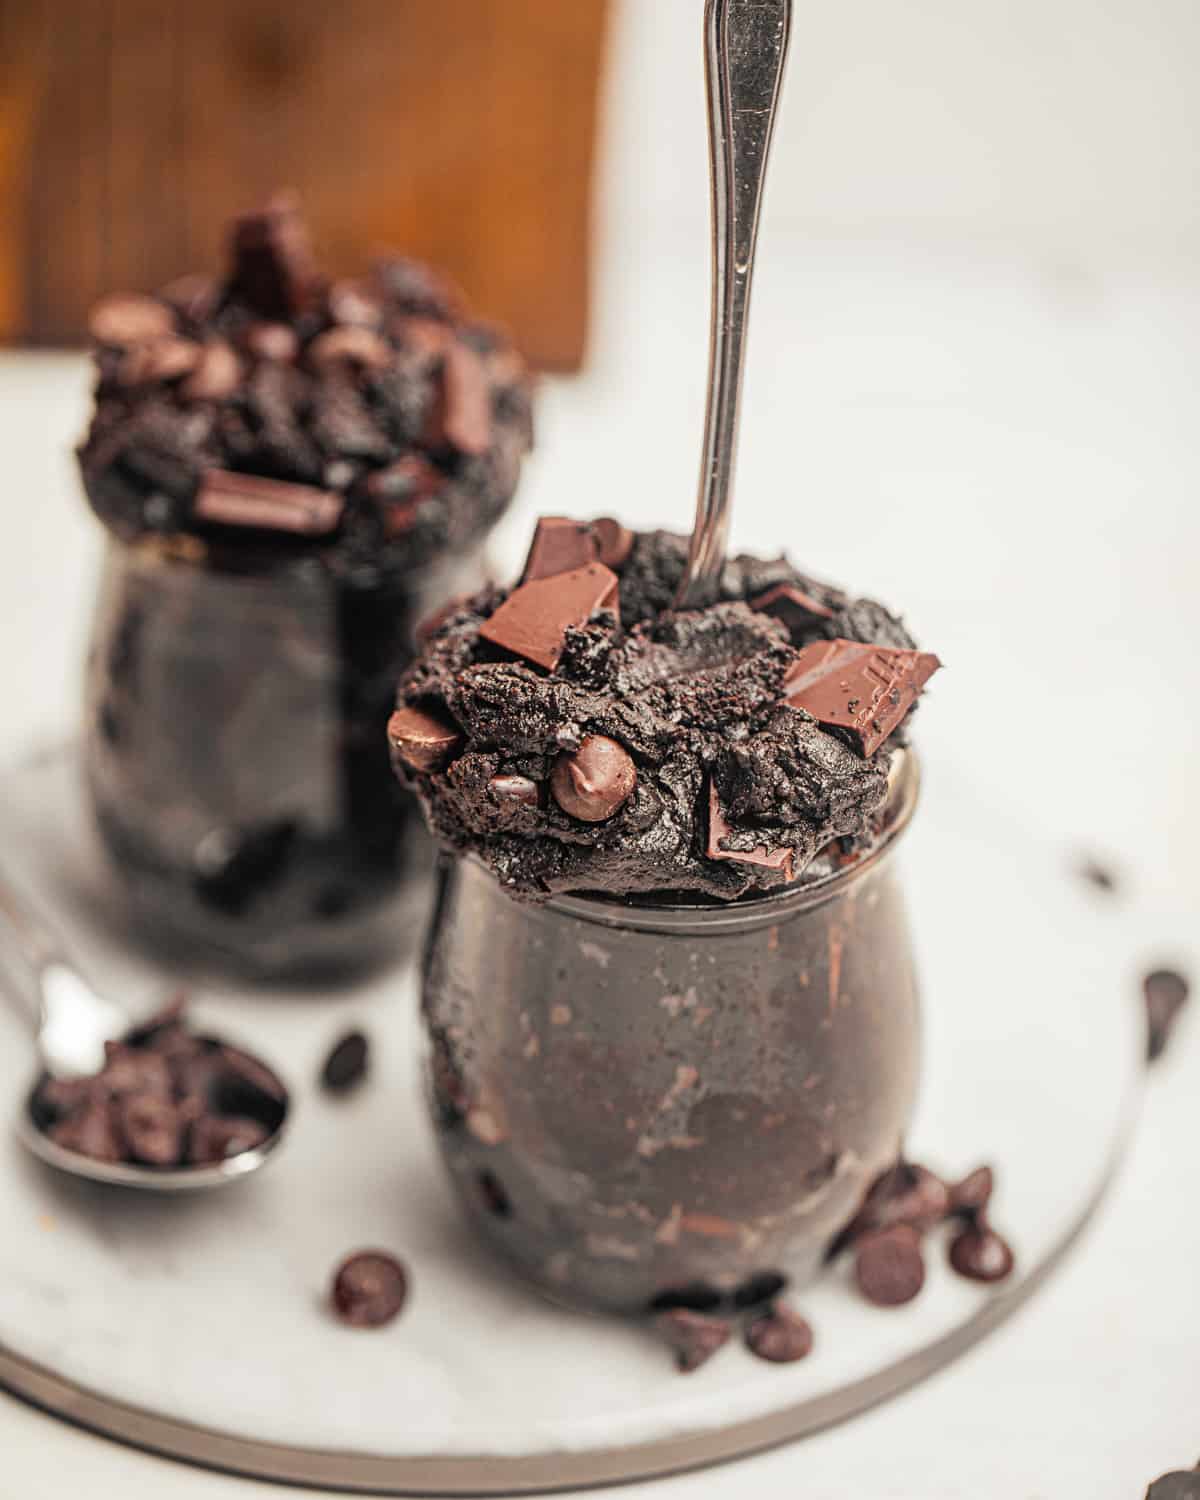 edible brownie batter in a small glass container with a spoon